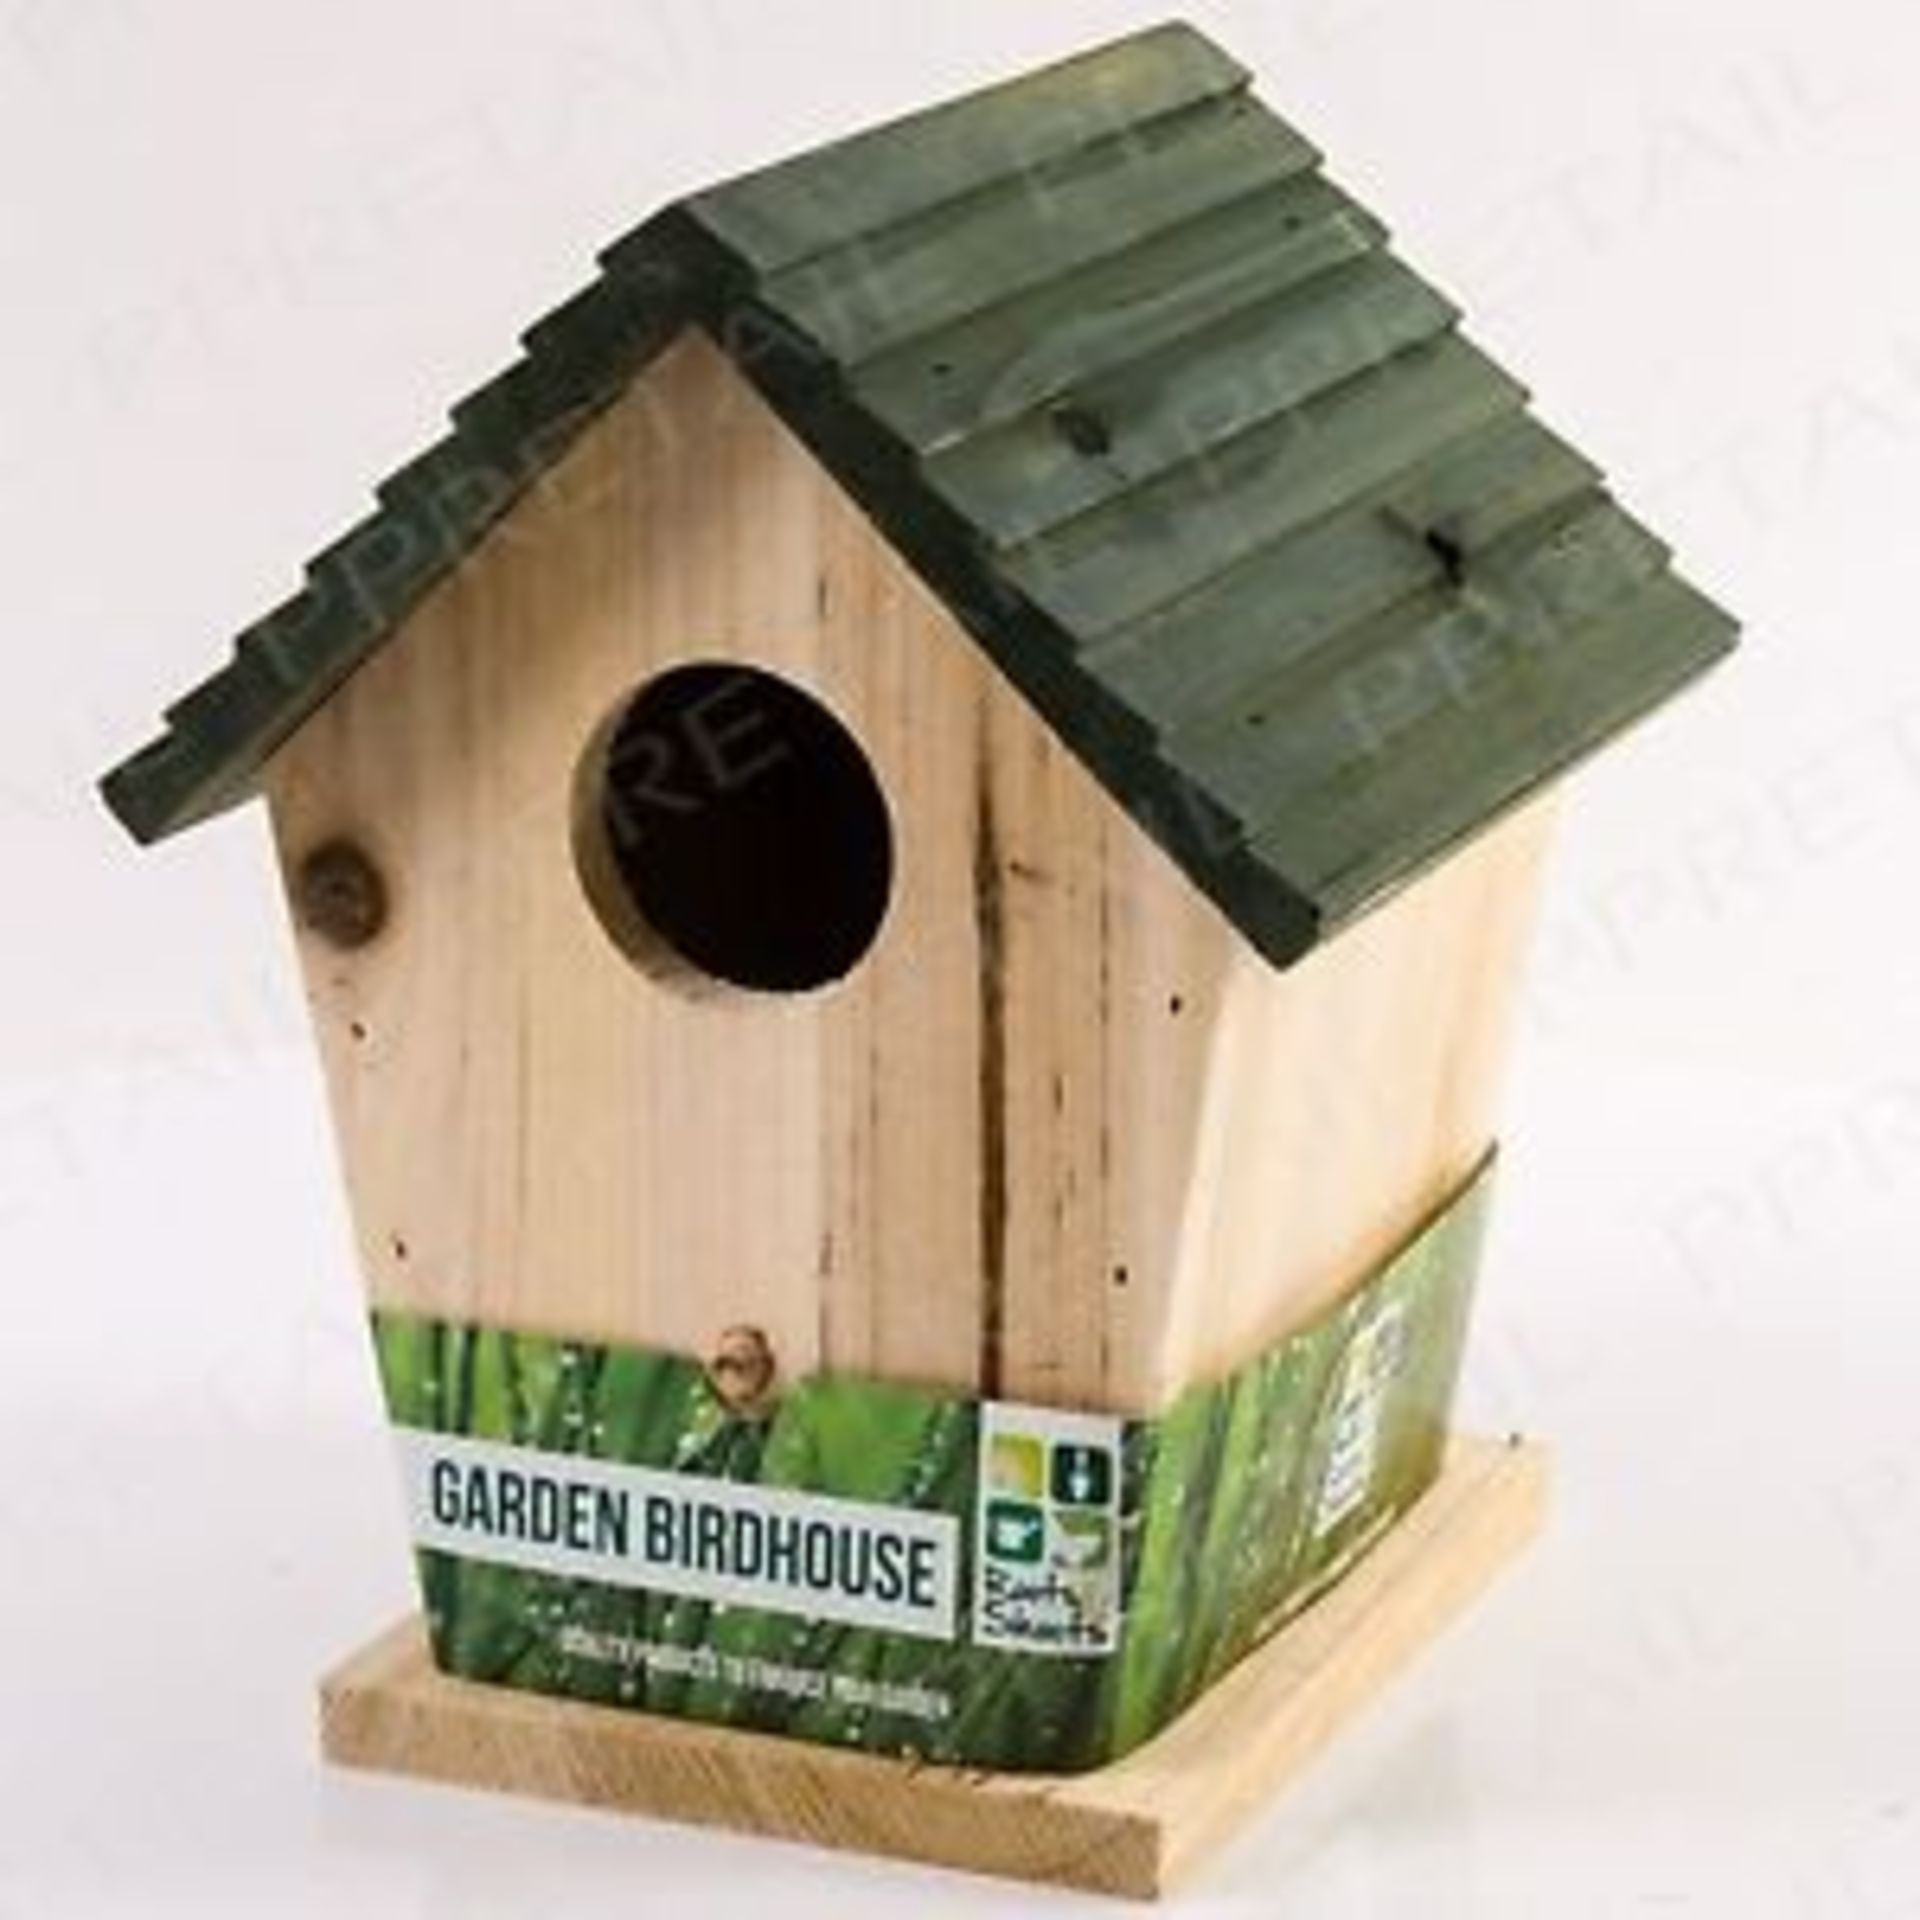 V Brand New Wooden Birdhouse With Pitched Roof And Perch